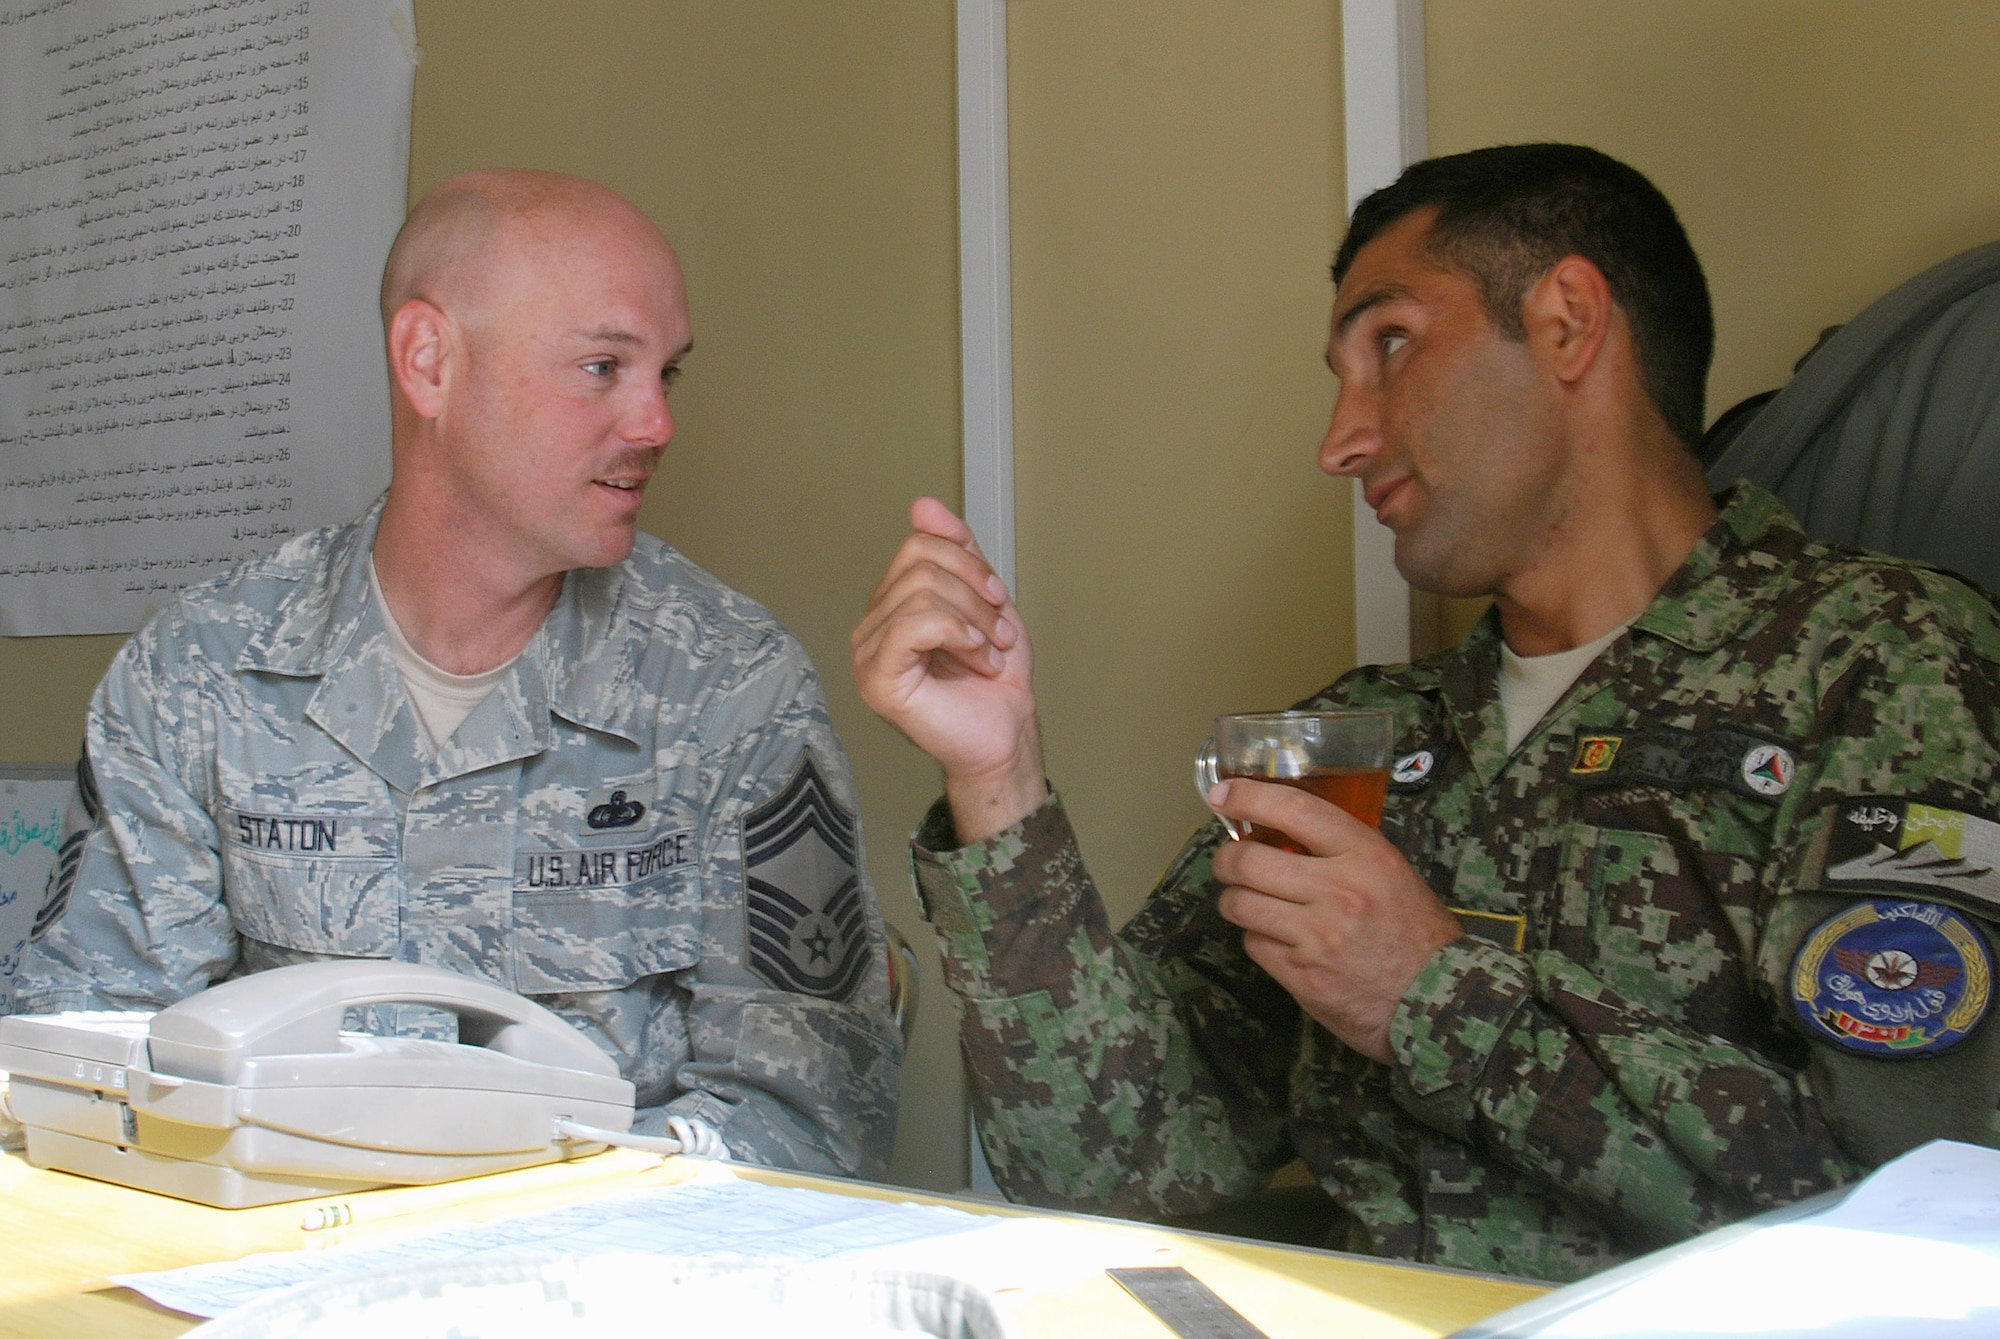 Chief Master Sgt. Dave Staton and Afghan air force Command Sgt. Maj. Mohammad Hassan talk during a meeting Dec. 1, 2010, at Kandahar Airfield, Afghanistan. Chief Staton is the 738th Air Expeditionary Advisory Group superintendent. As the senior enlisted member, he is also the direct mentor to the Kandahar Air Wing’s enlisted leader, Sergeant Major Hassan. (U.S. Air Force photo/Senior Airman Melissa B. White/Released)